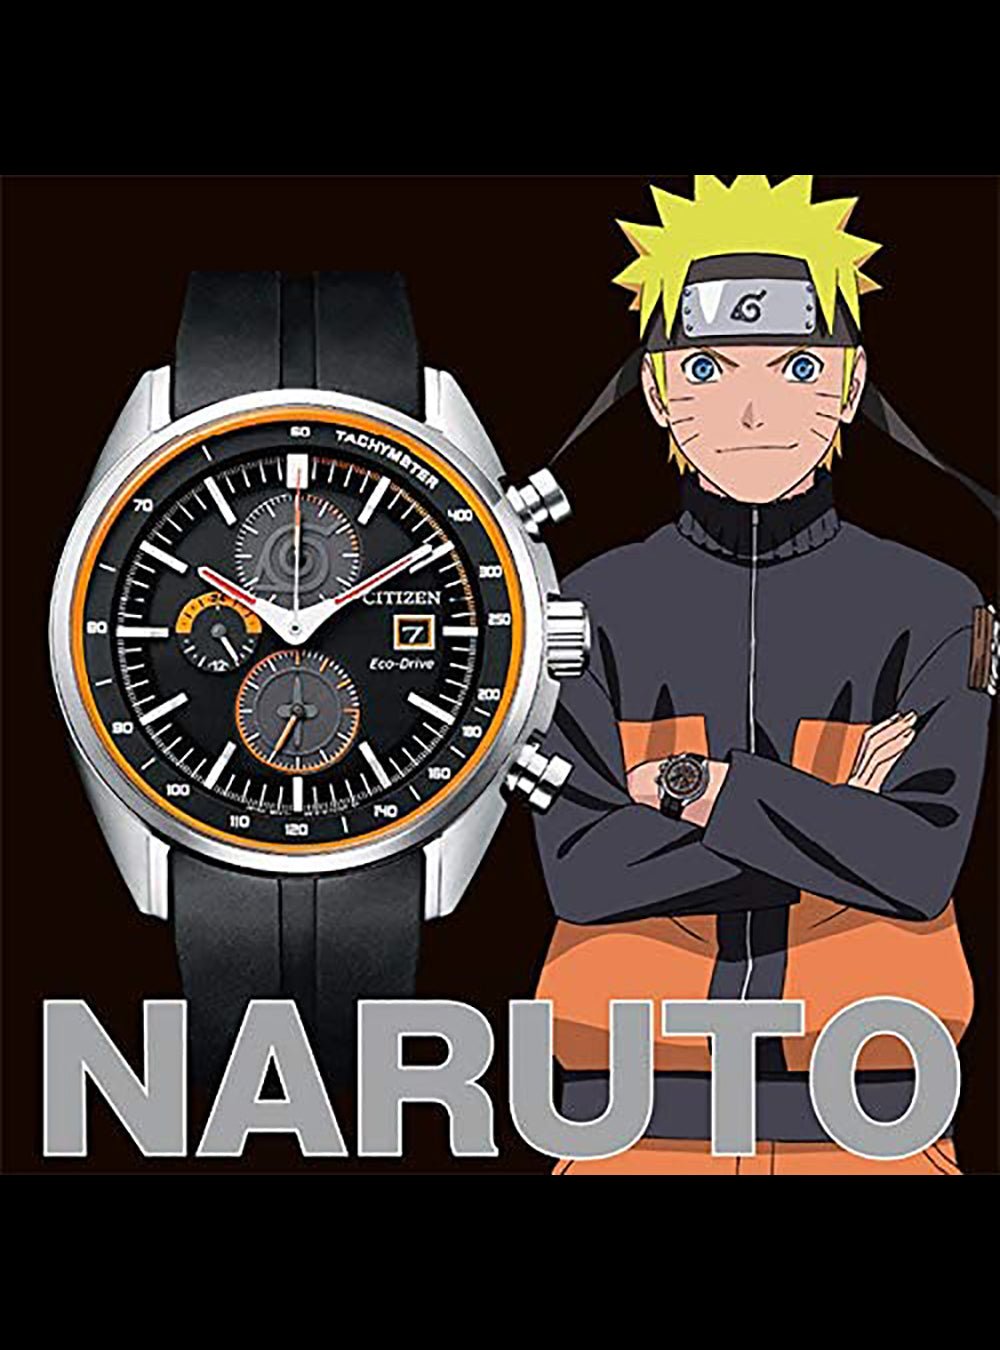 Montblanc Summit 3 Smartwatch x Naruto arrives with custom animated watch  faces - NotebookCheck.net News